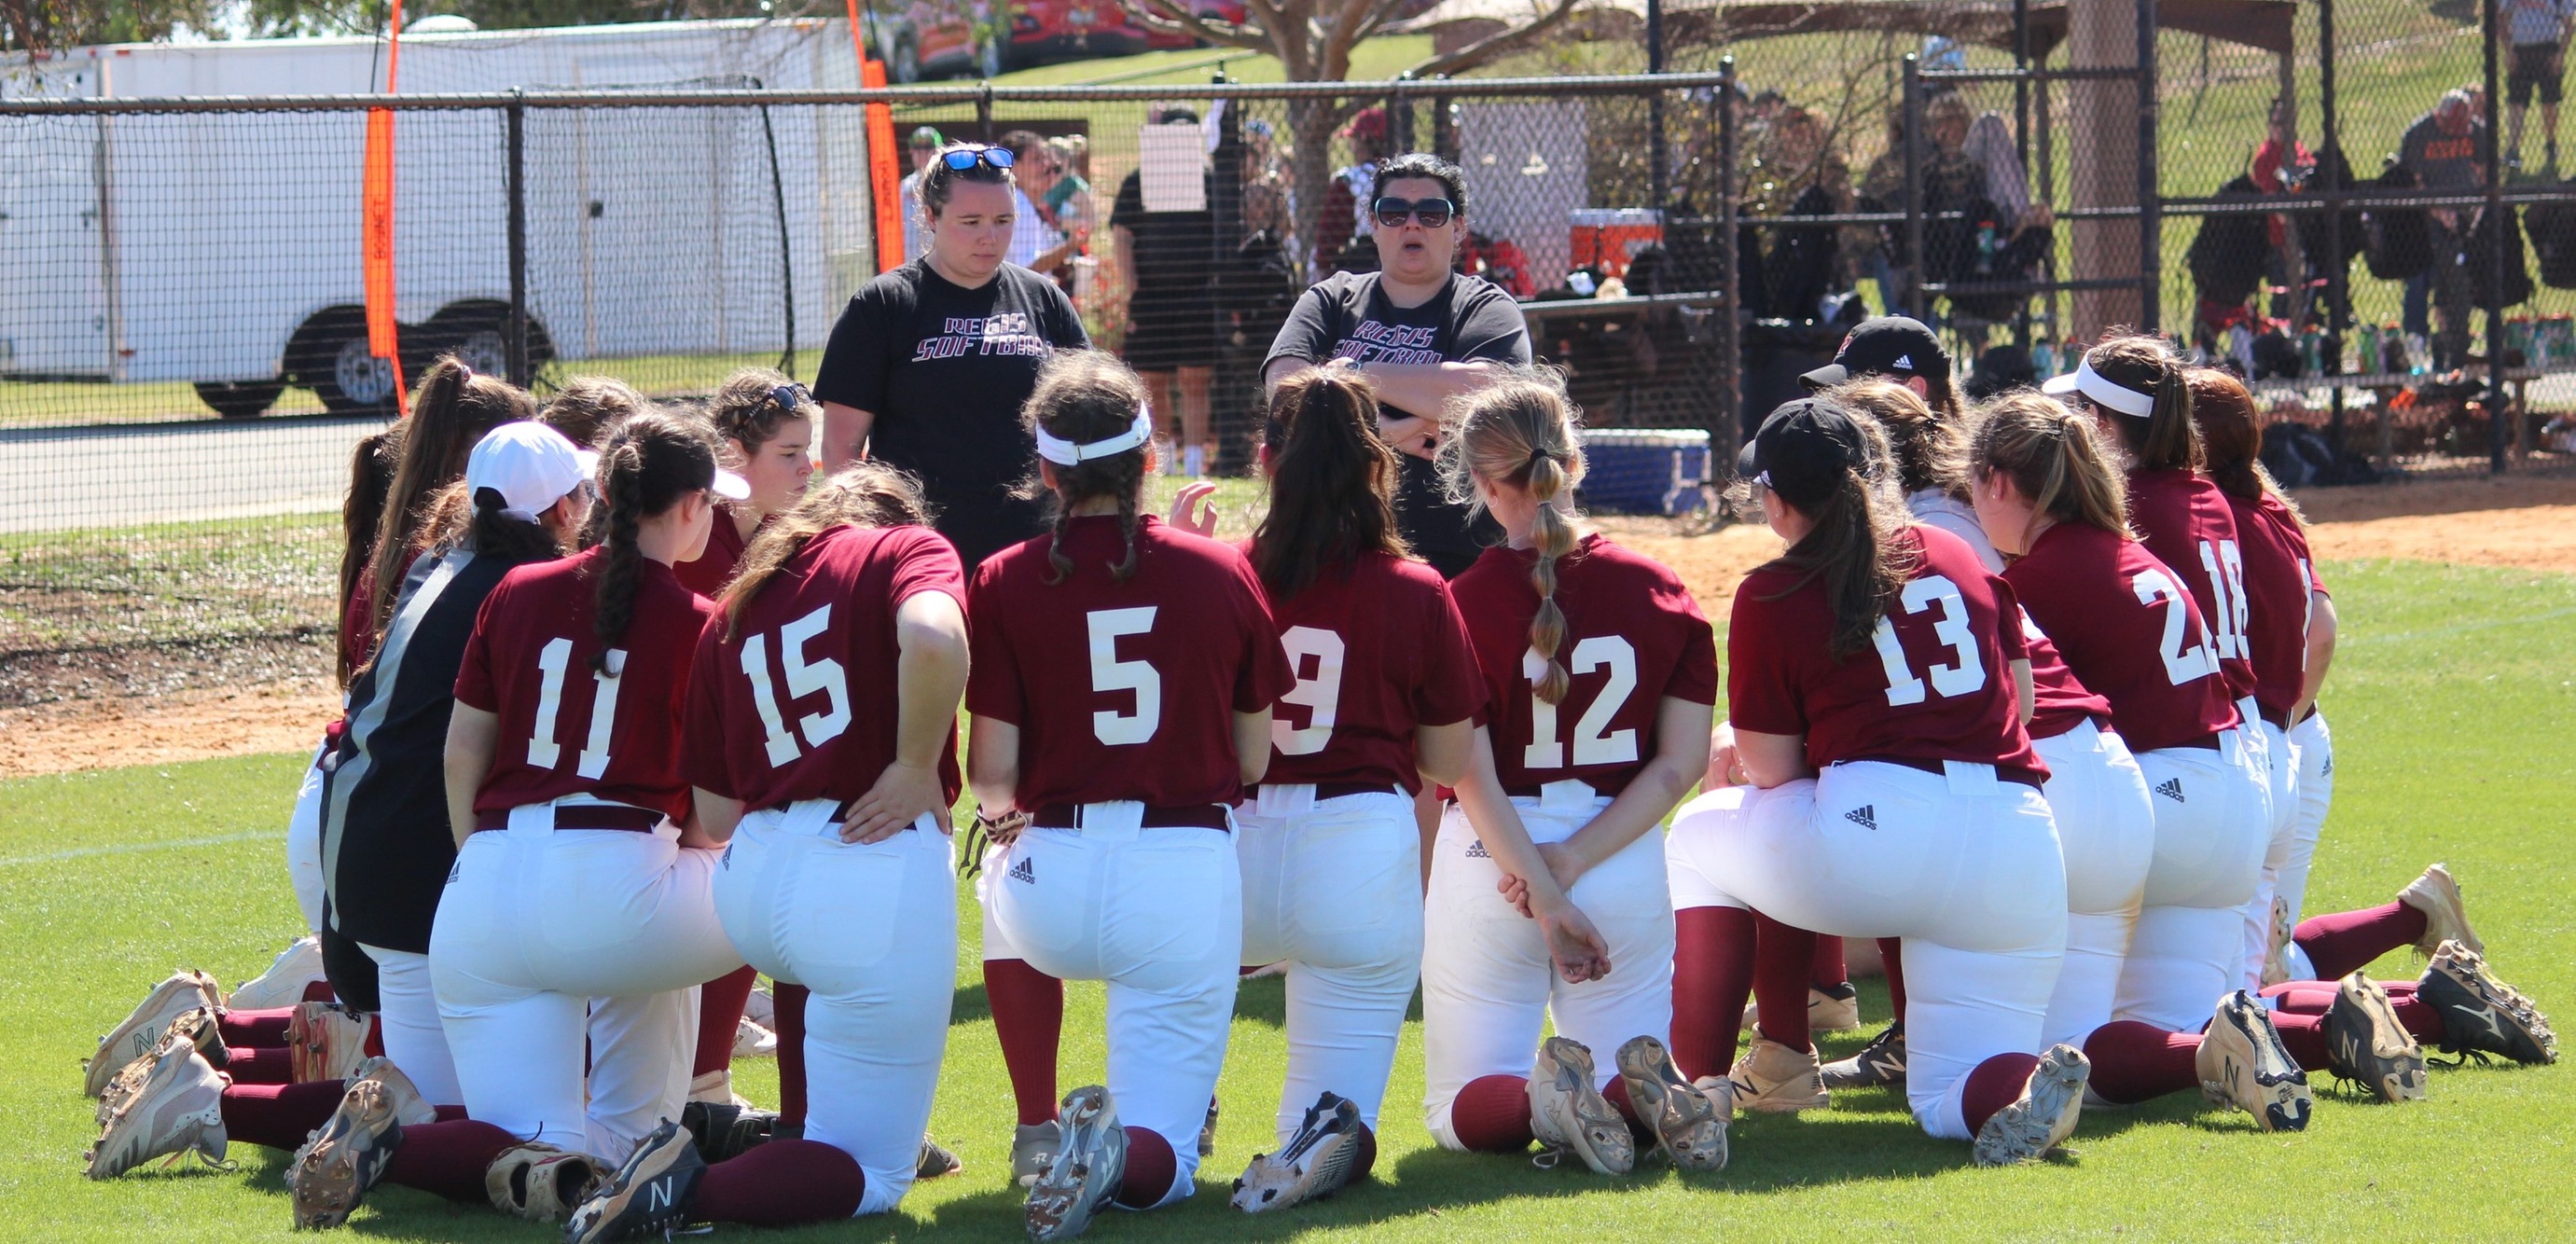 Regis Softball Concludes Play in Florida